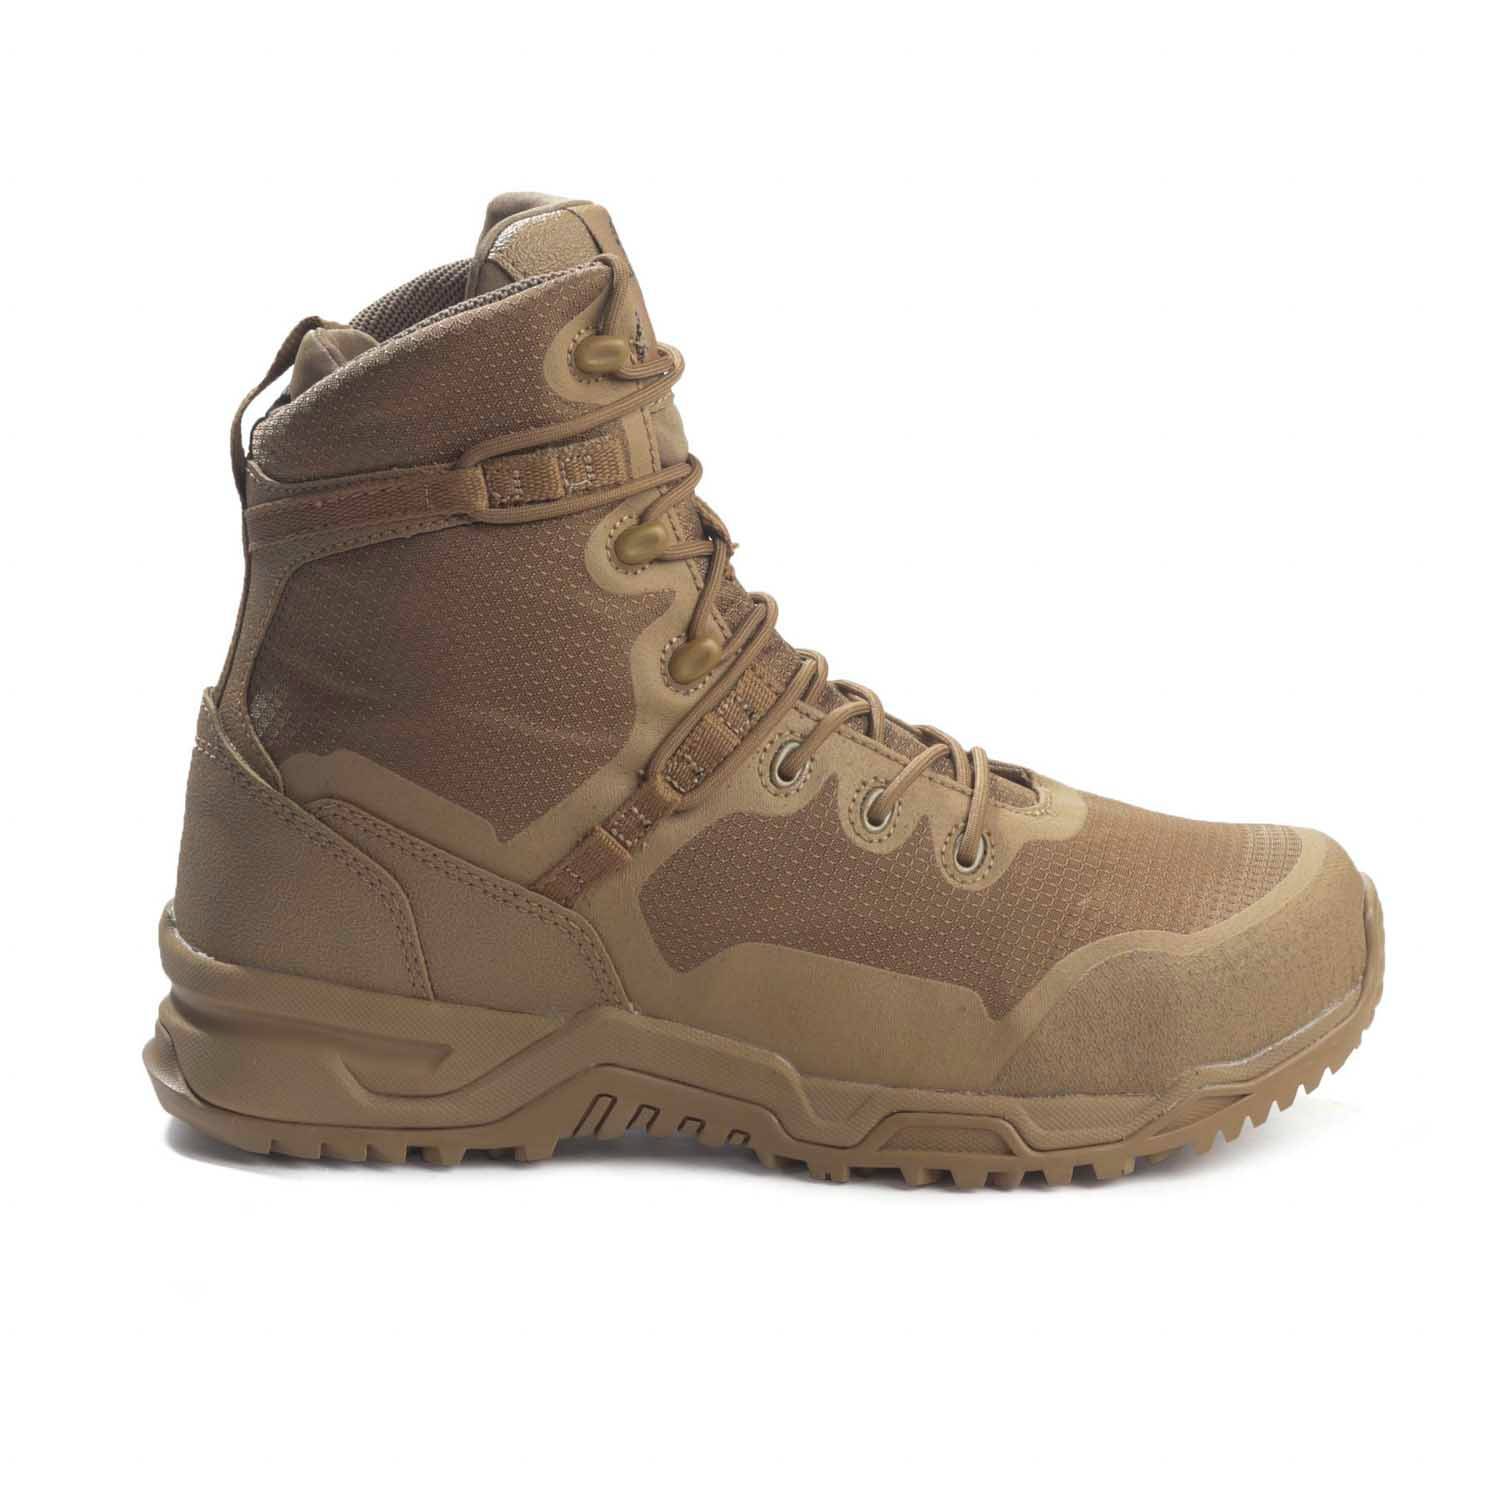 ALTAMA RAPTOR 8" SAFETY TOE TACTICAL BOOTS